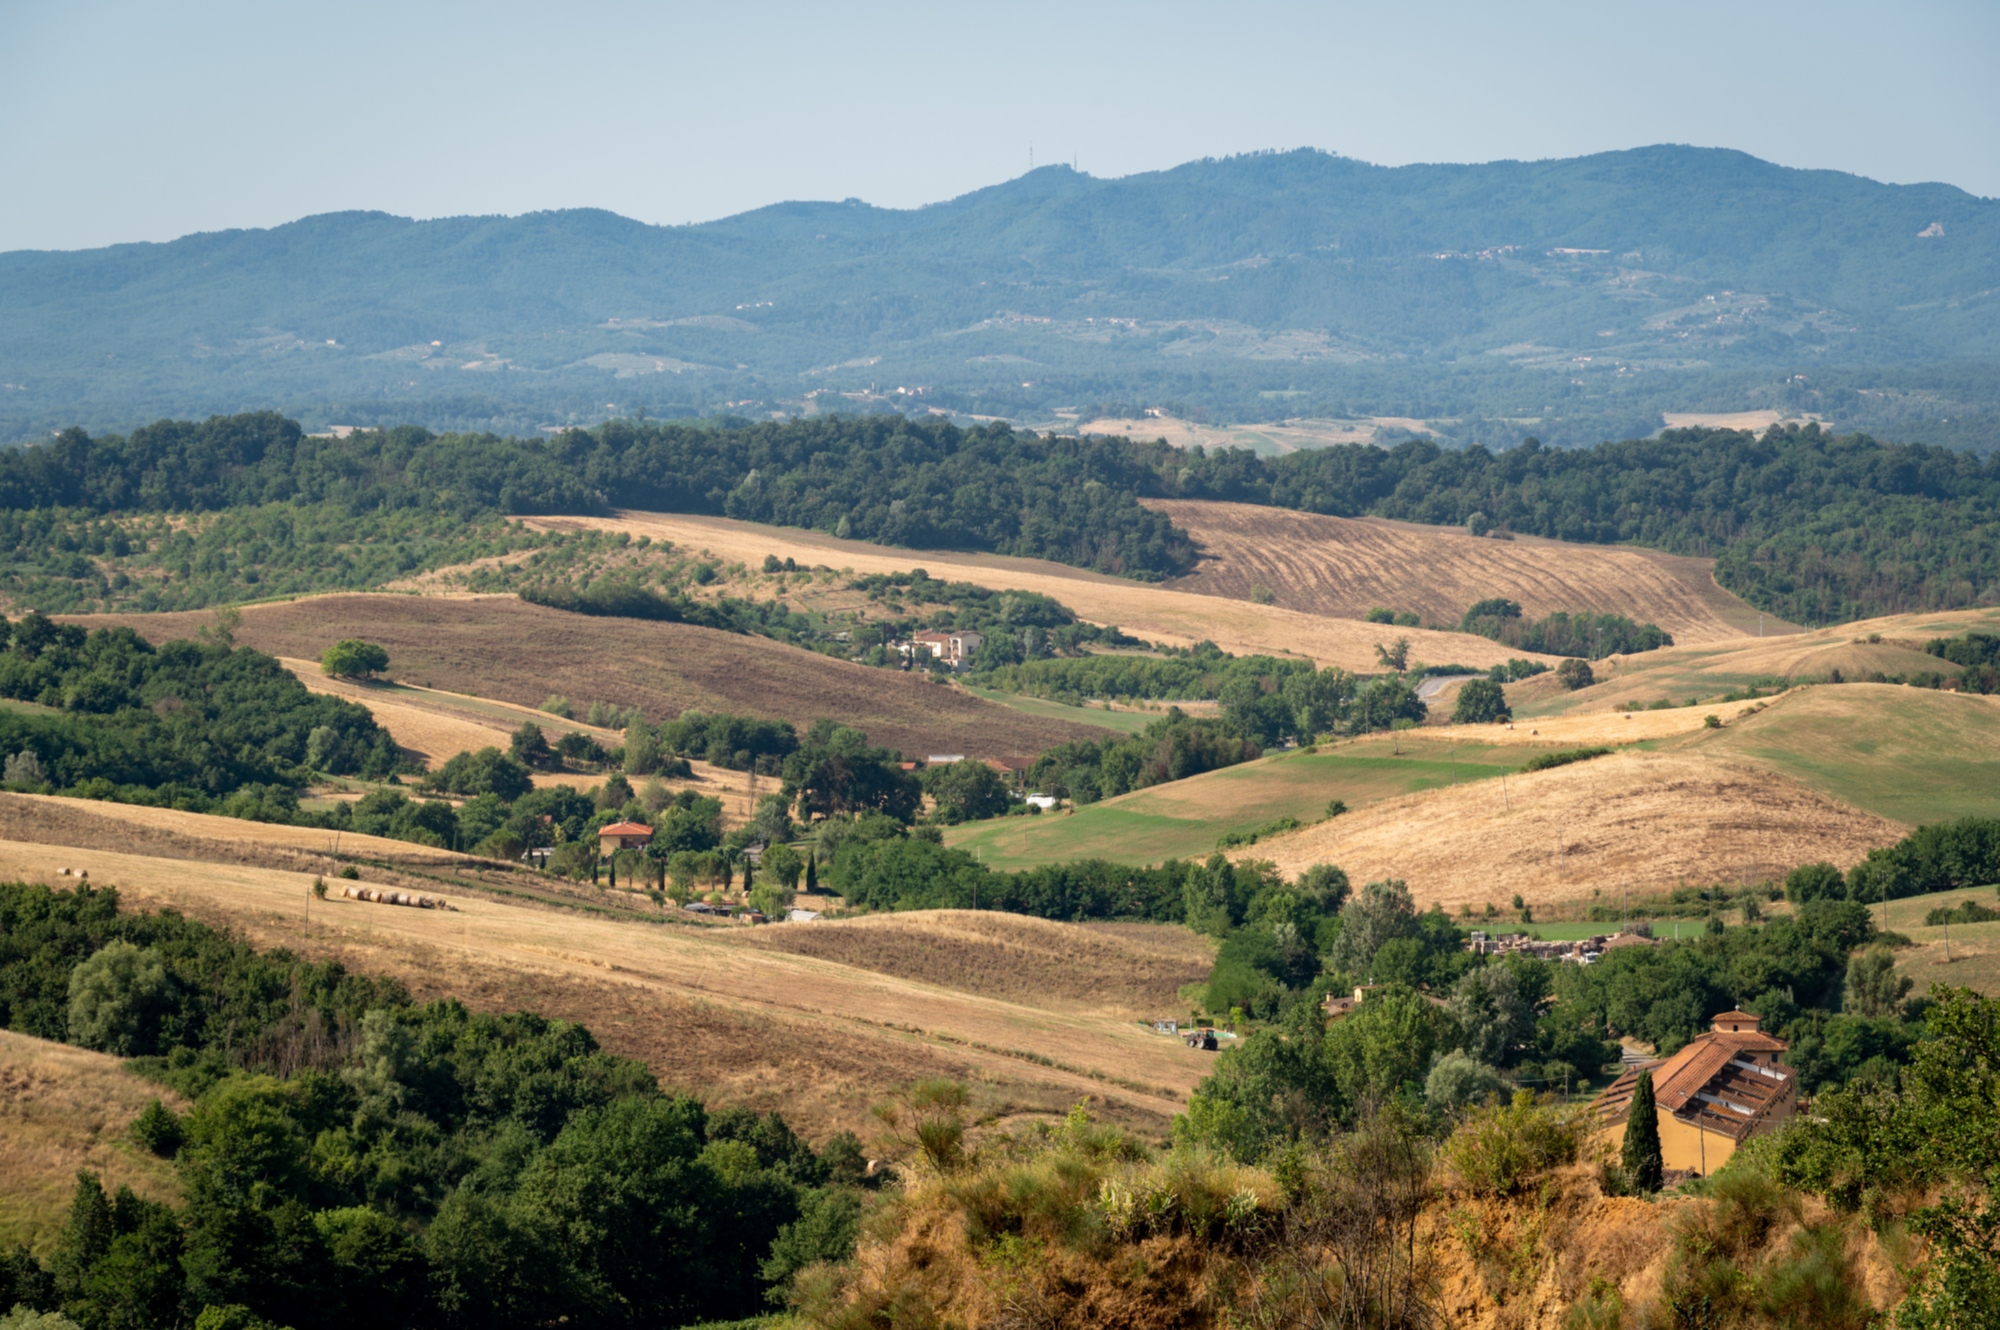 View of the Valdarno